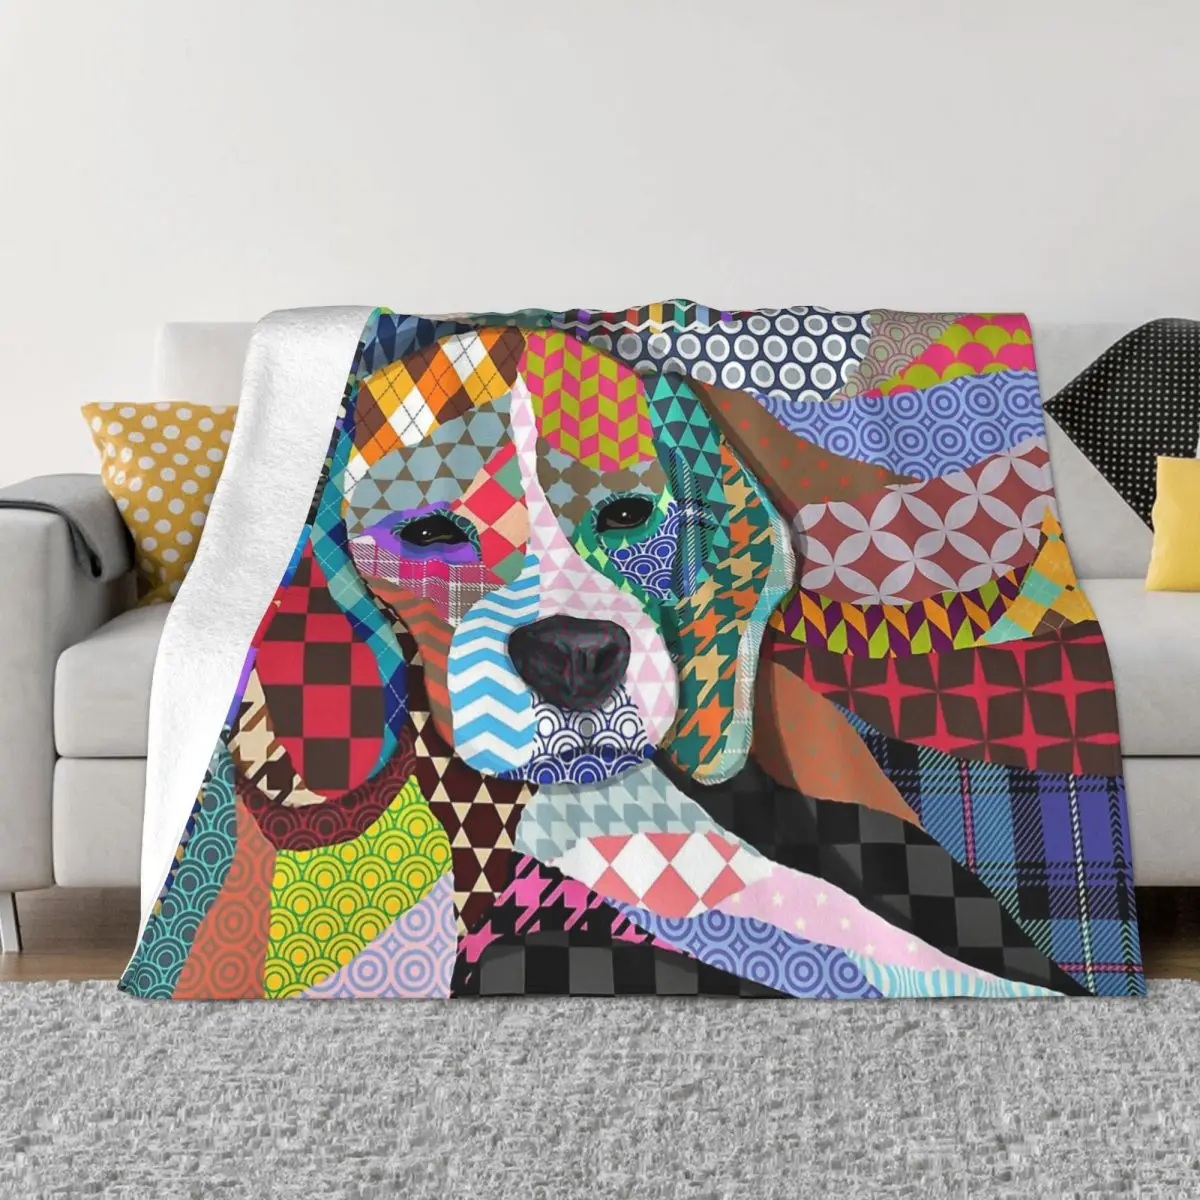 

Dog Cute Naughty Lively Clever Clingy Blanket Flannel Beagle Dog Cozy Soft FLeece Bedspread